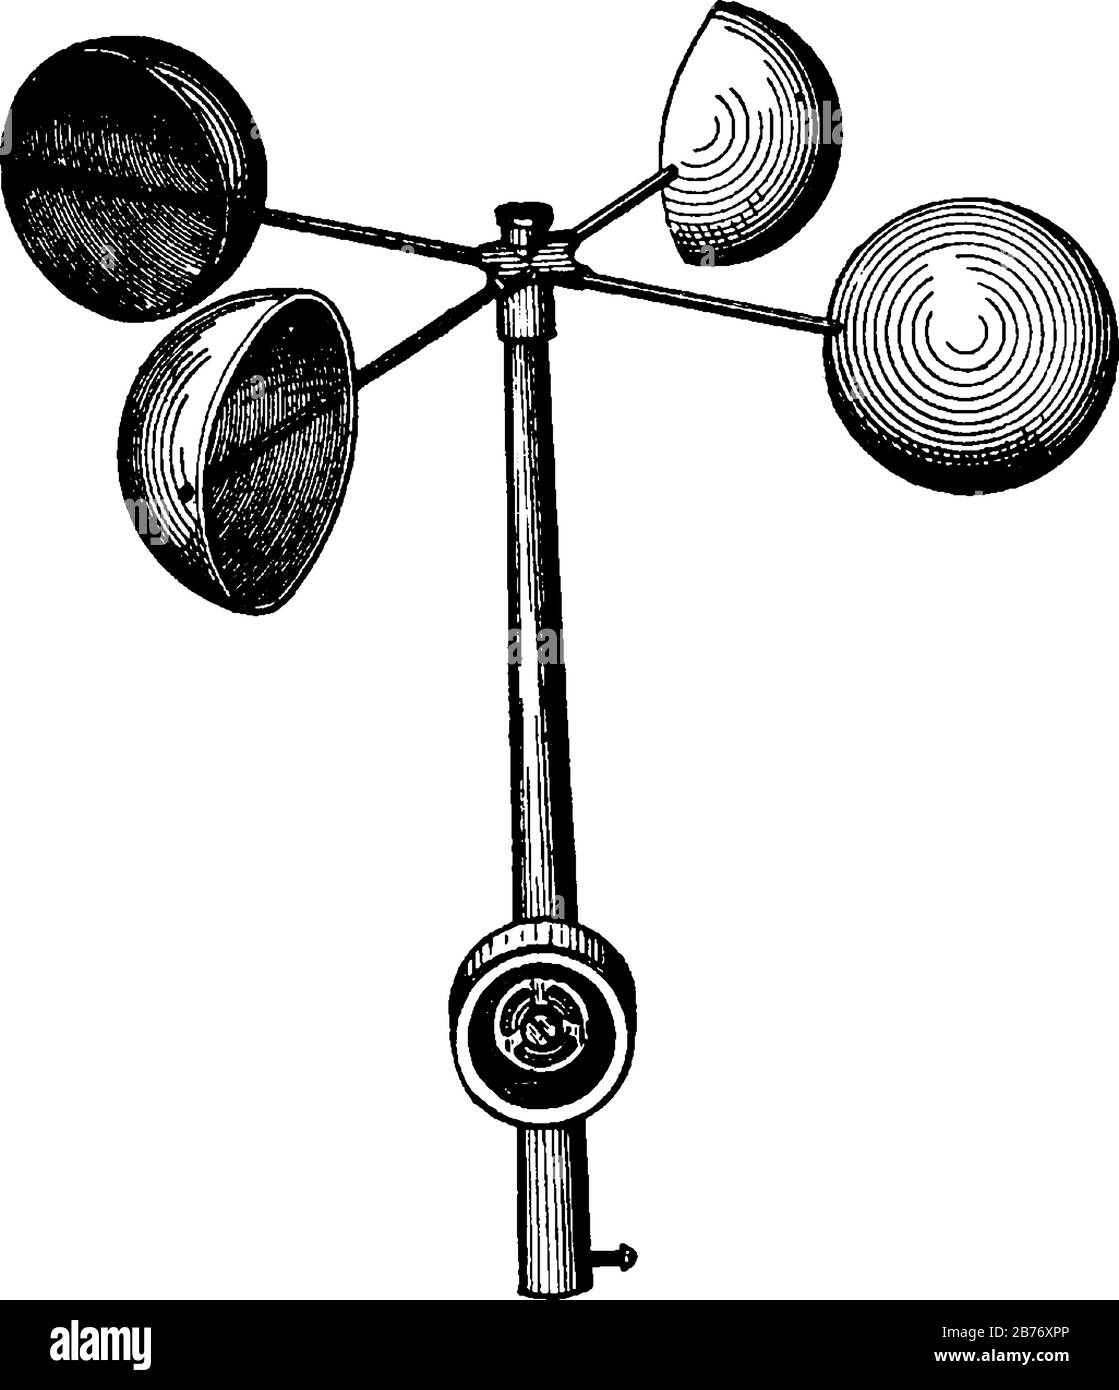 Anemometer device used for measuring wind speed Vector Image